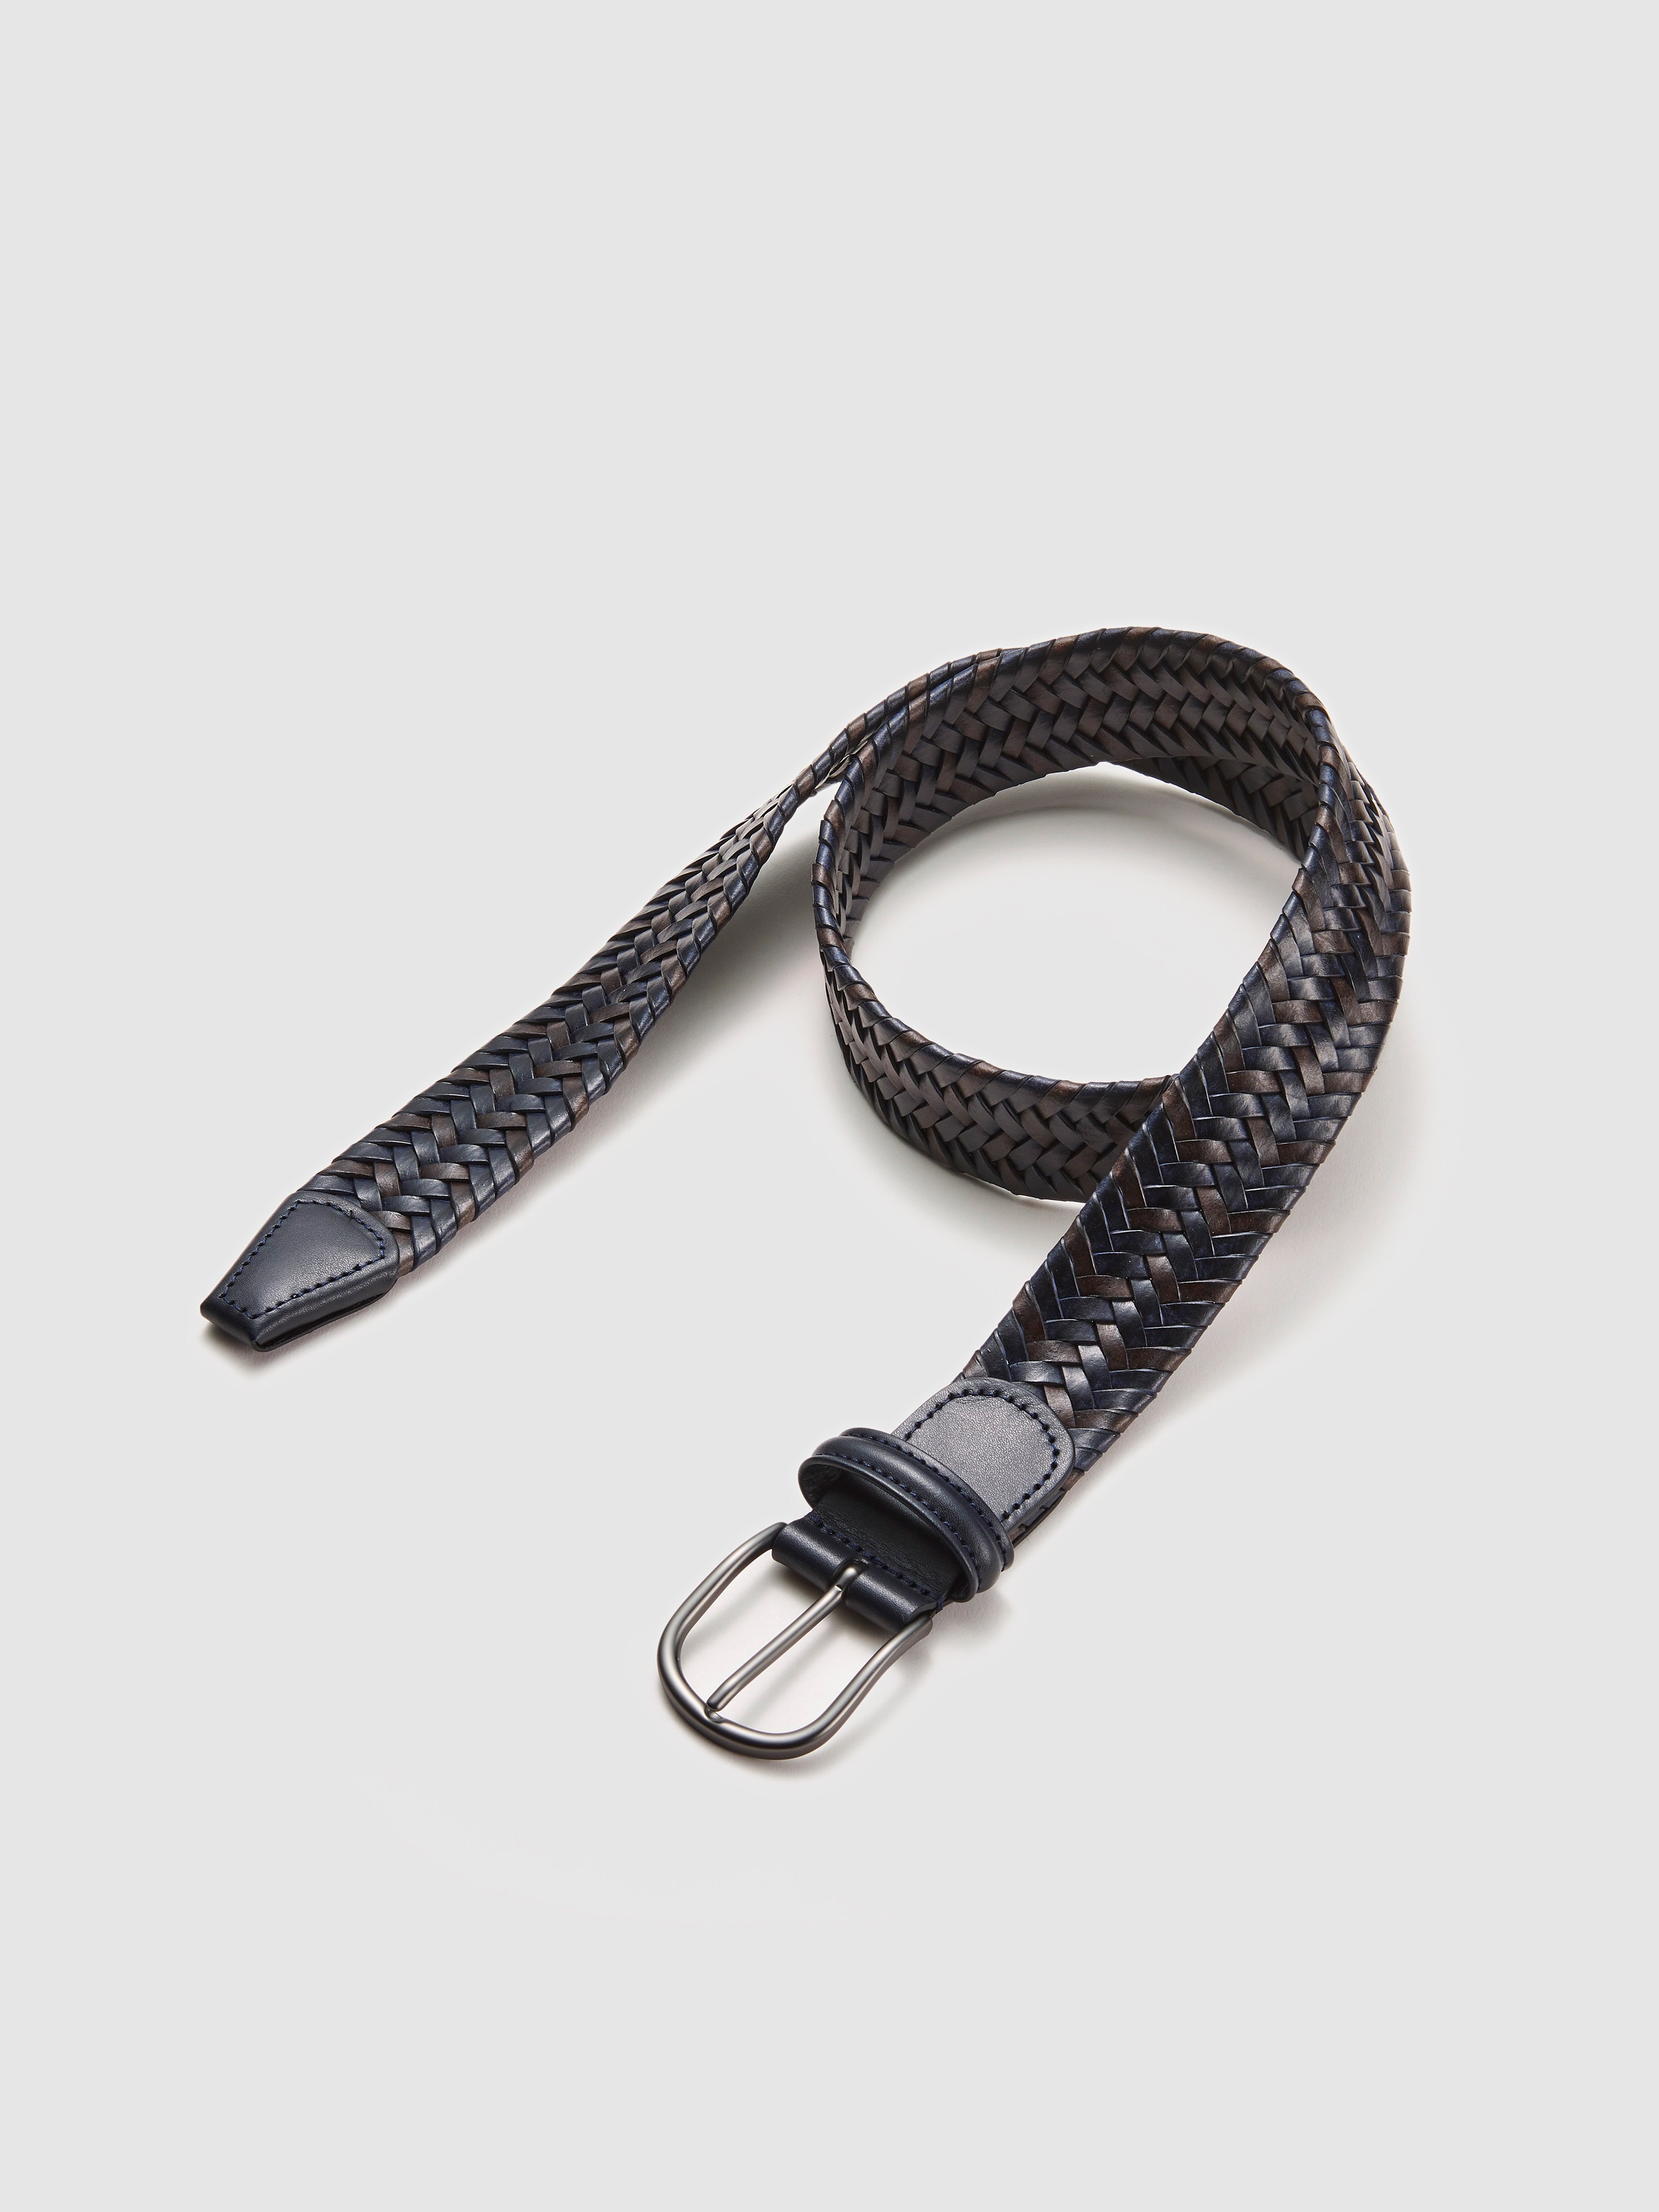 Anderson's Braided Leather Belt In Black/brown